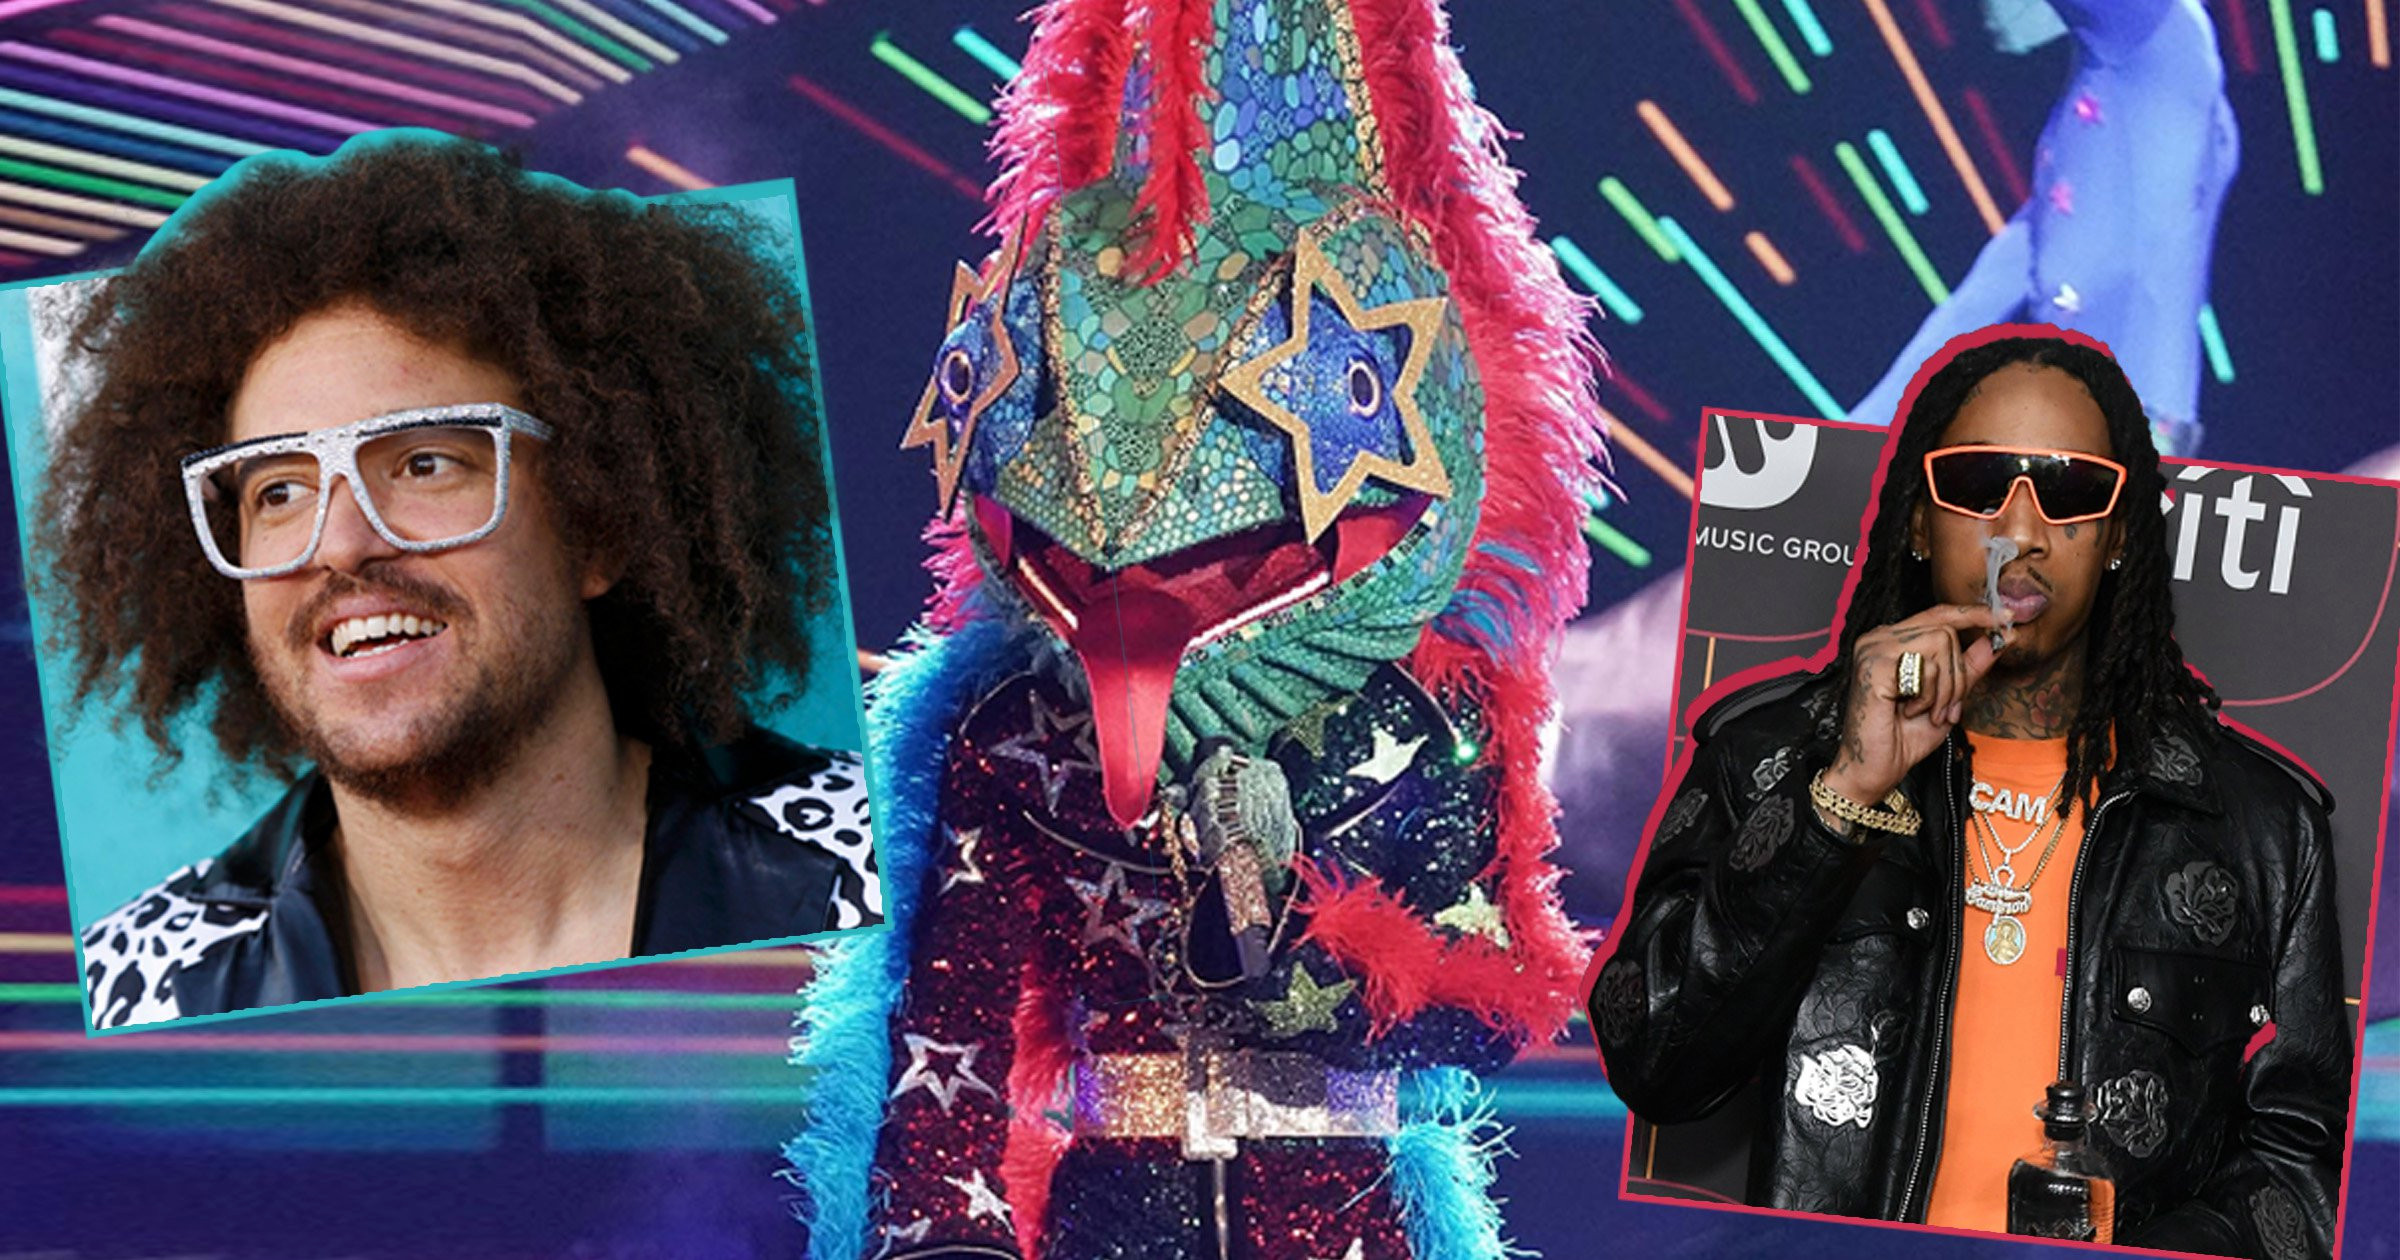 Who is Chameleon on The Masked Singer US? All the clues and theories